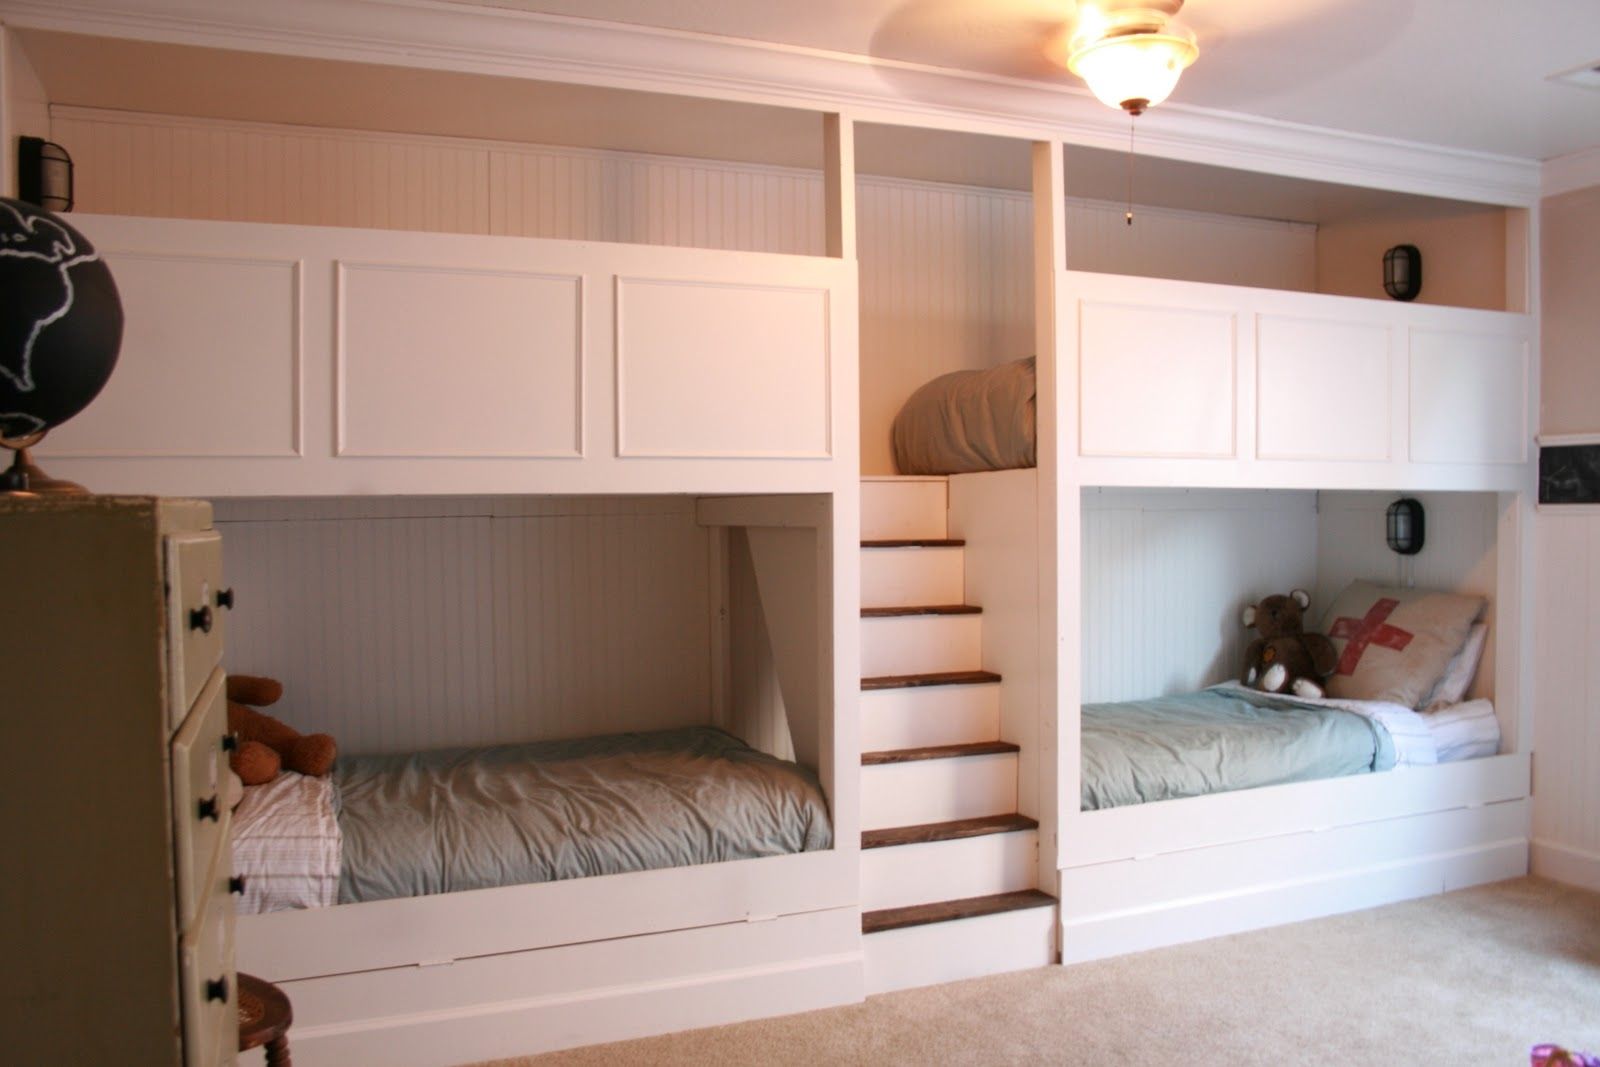 Neutral Cream Wooden Built In Bunk Bed With Brown Blankets Plus Pull Out Storages Also Crystal Pendant Lamp (Photo 2449 of 7825)